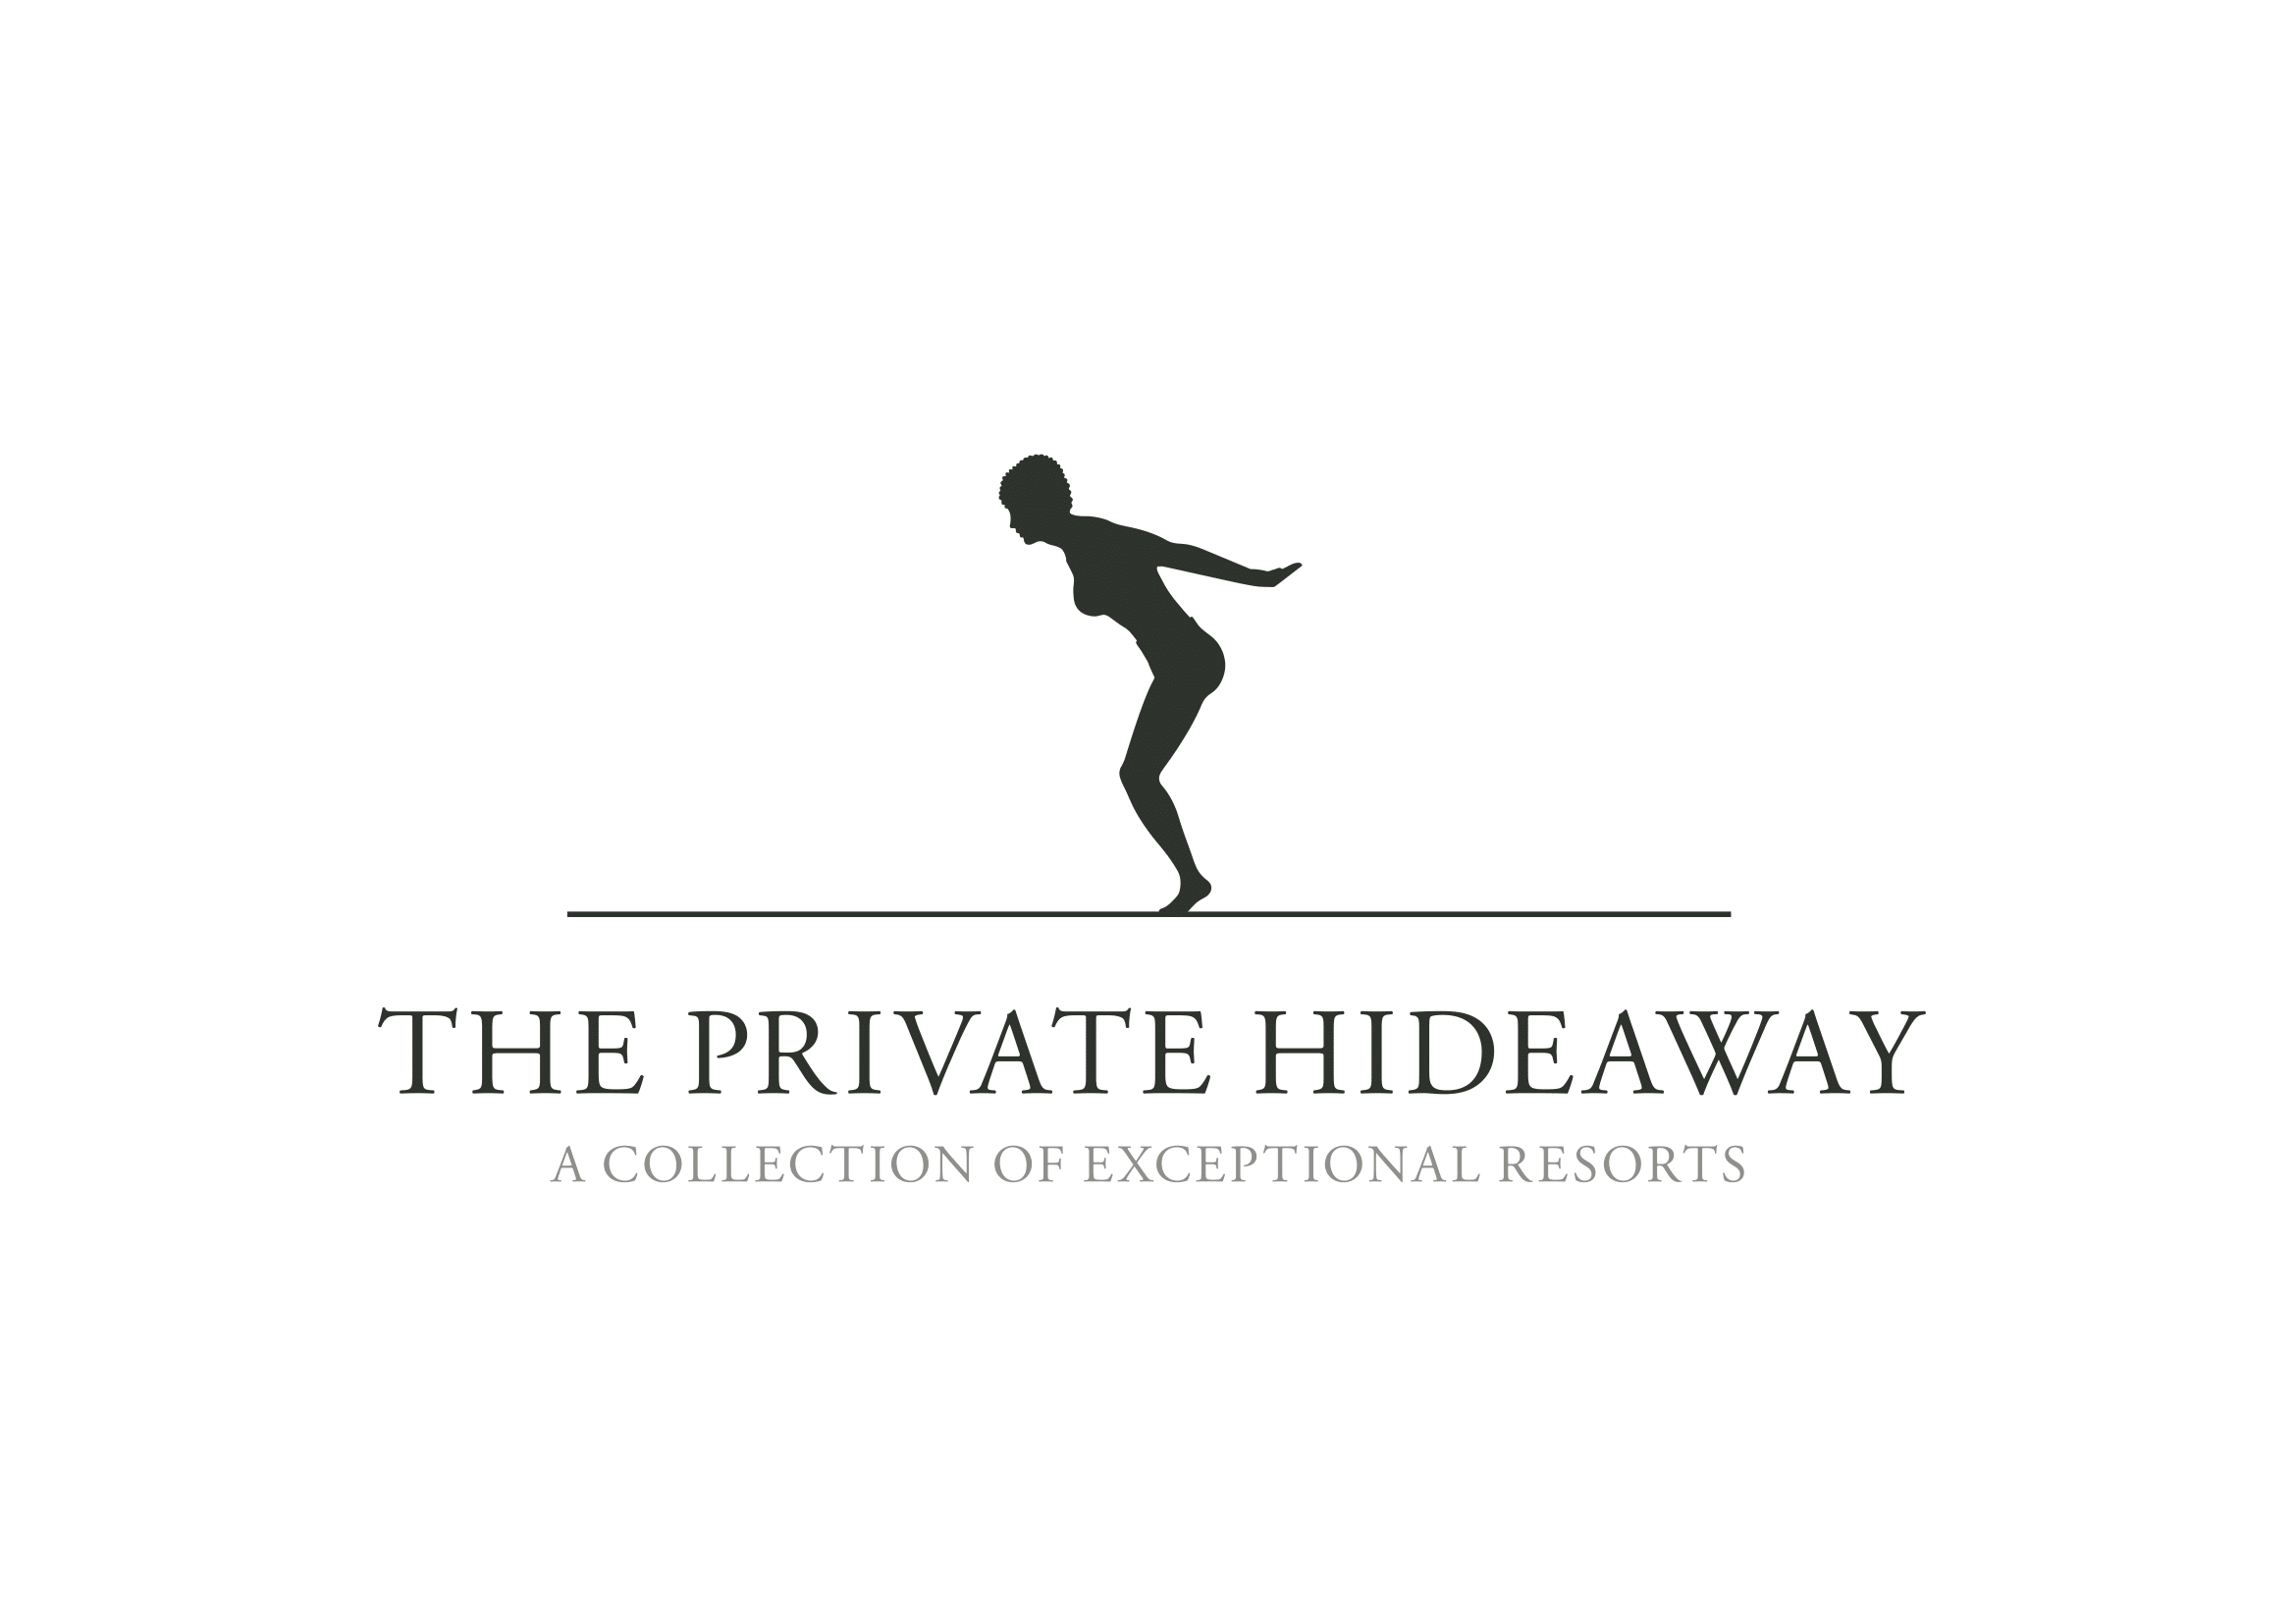 The Private Hideaway